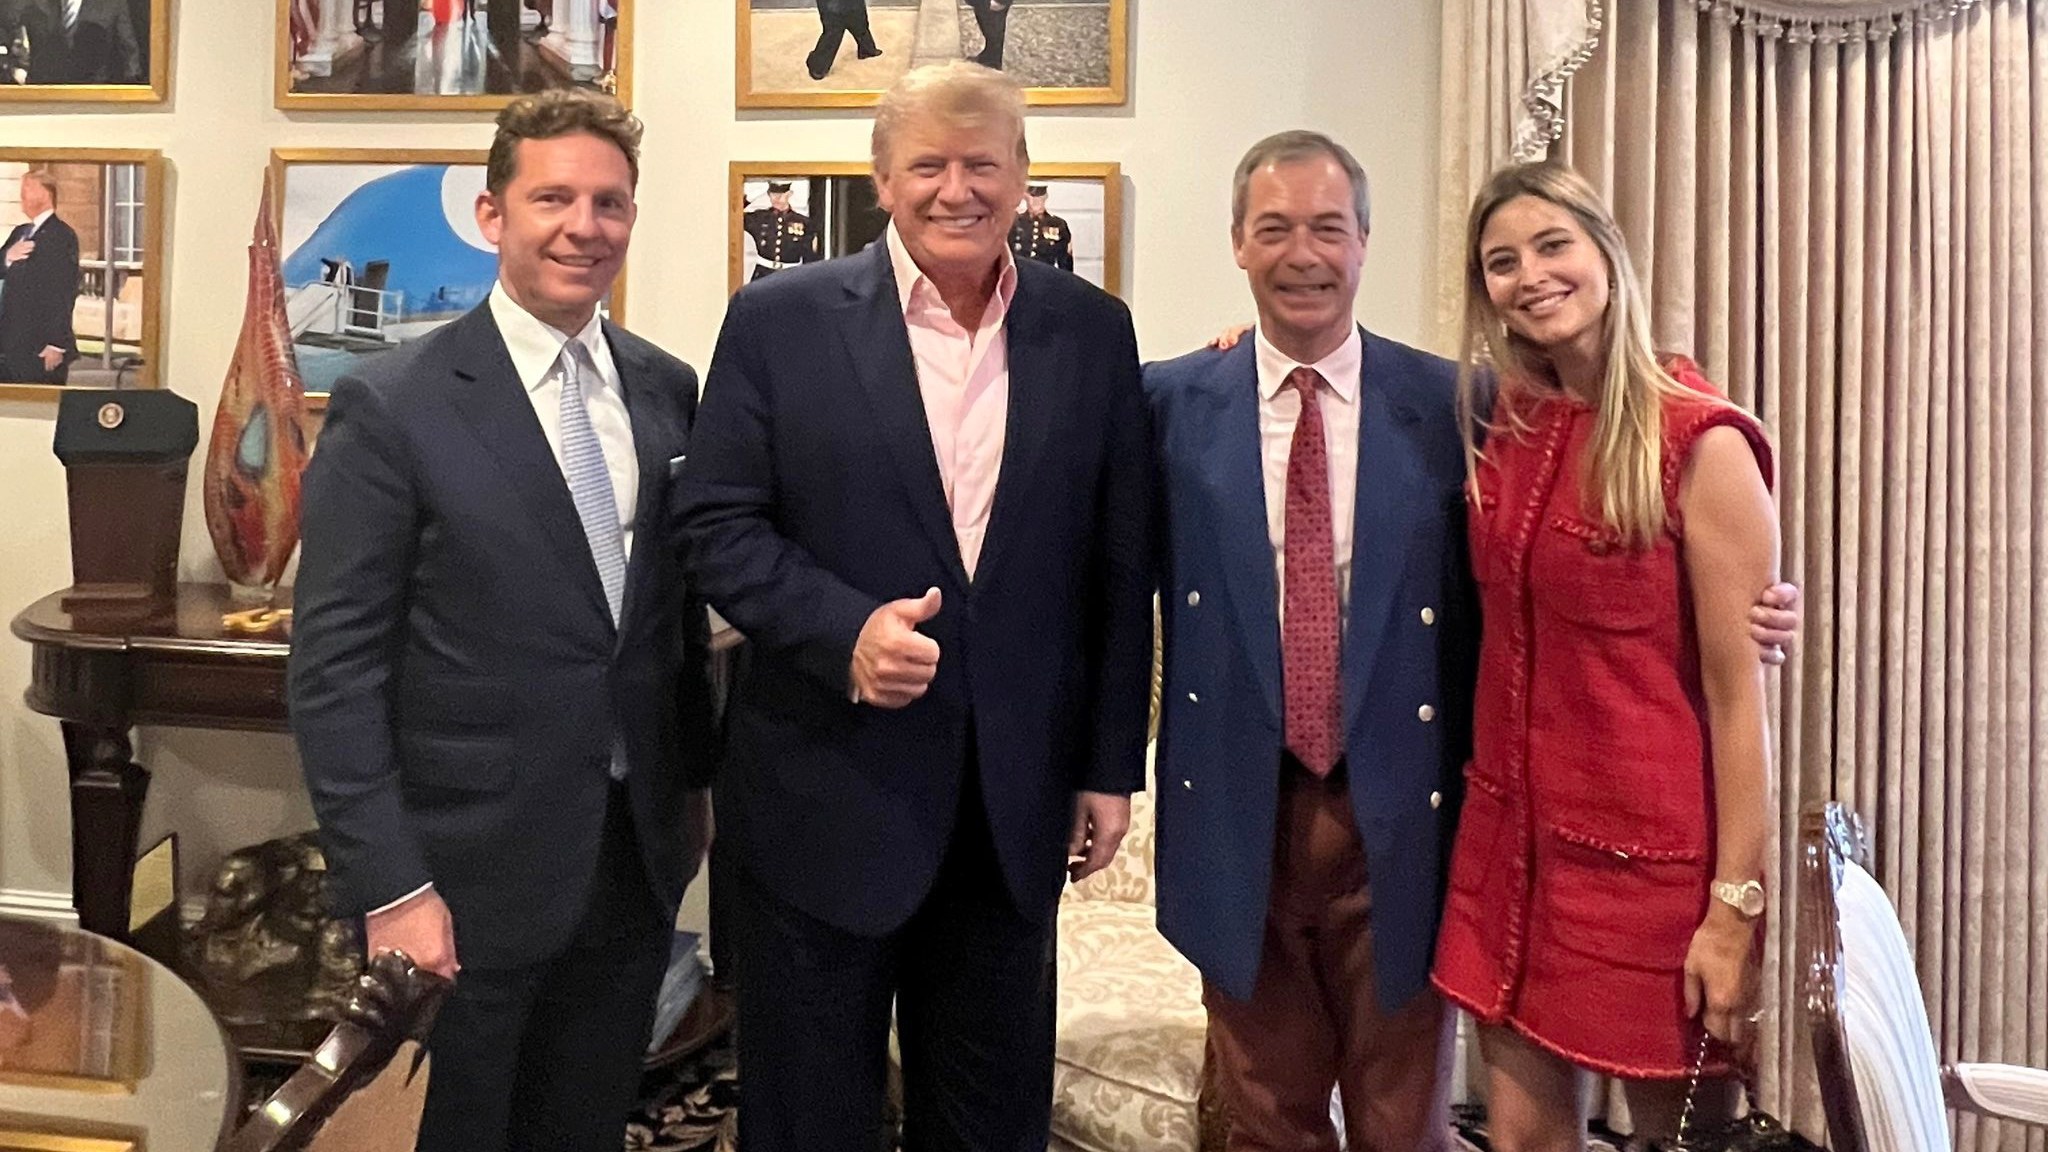 Holly Valance and her developer husband Nick Candy joined Donald Trump and Nigel Farage for a “great dinner at Mar-a-Lago” in 2022